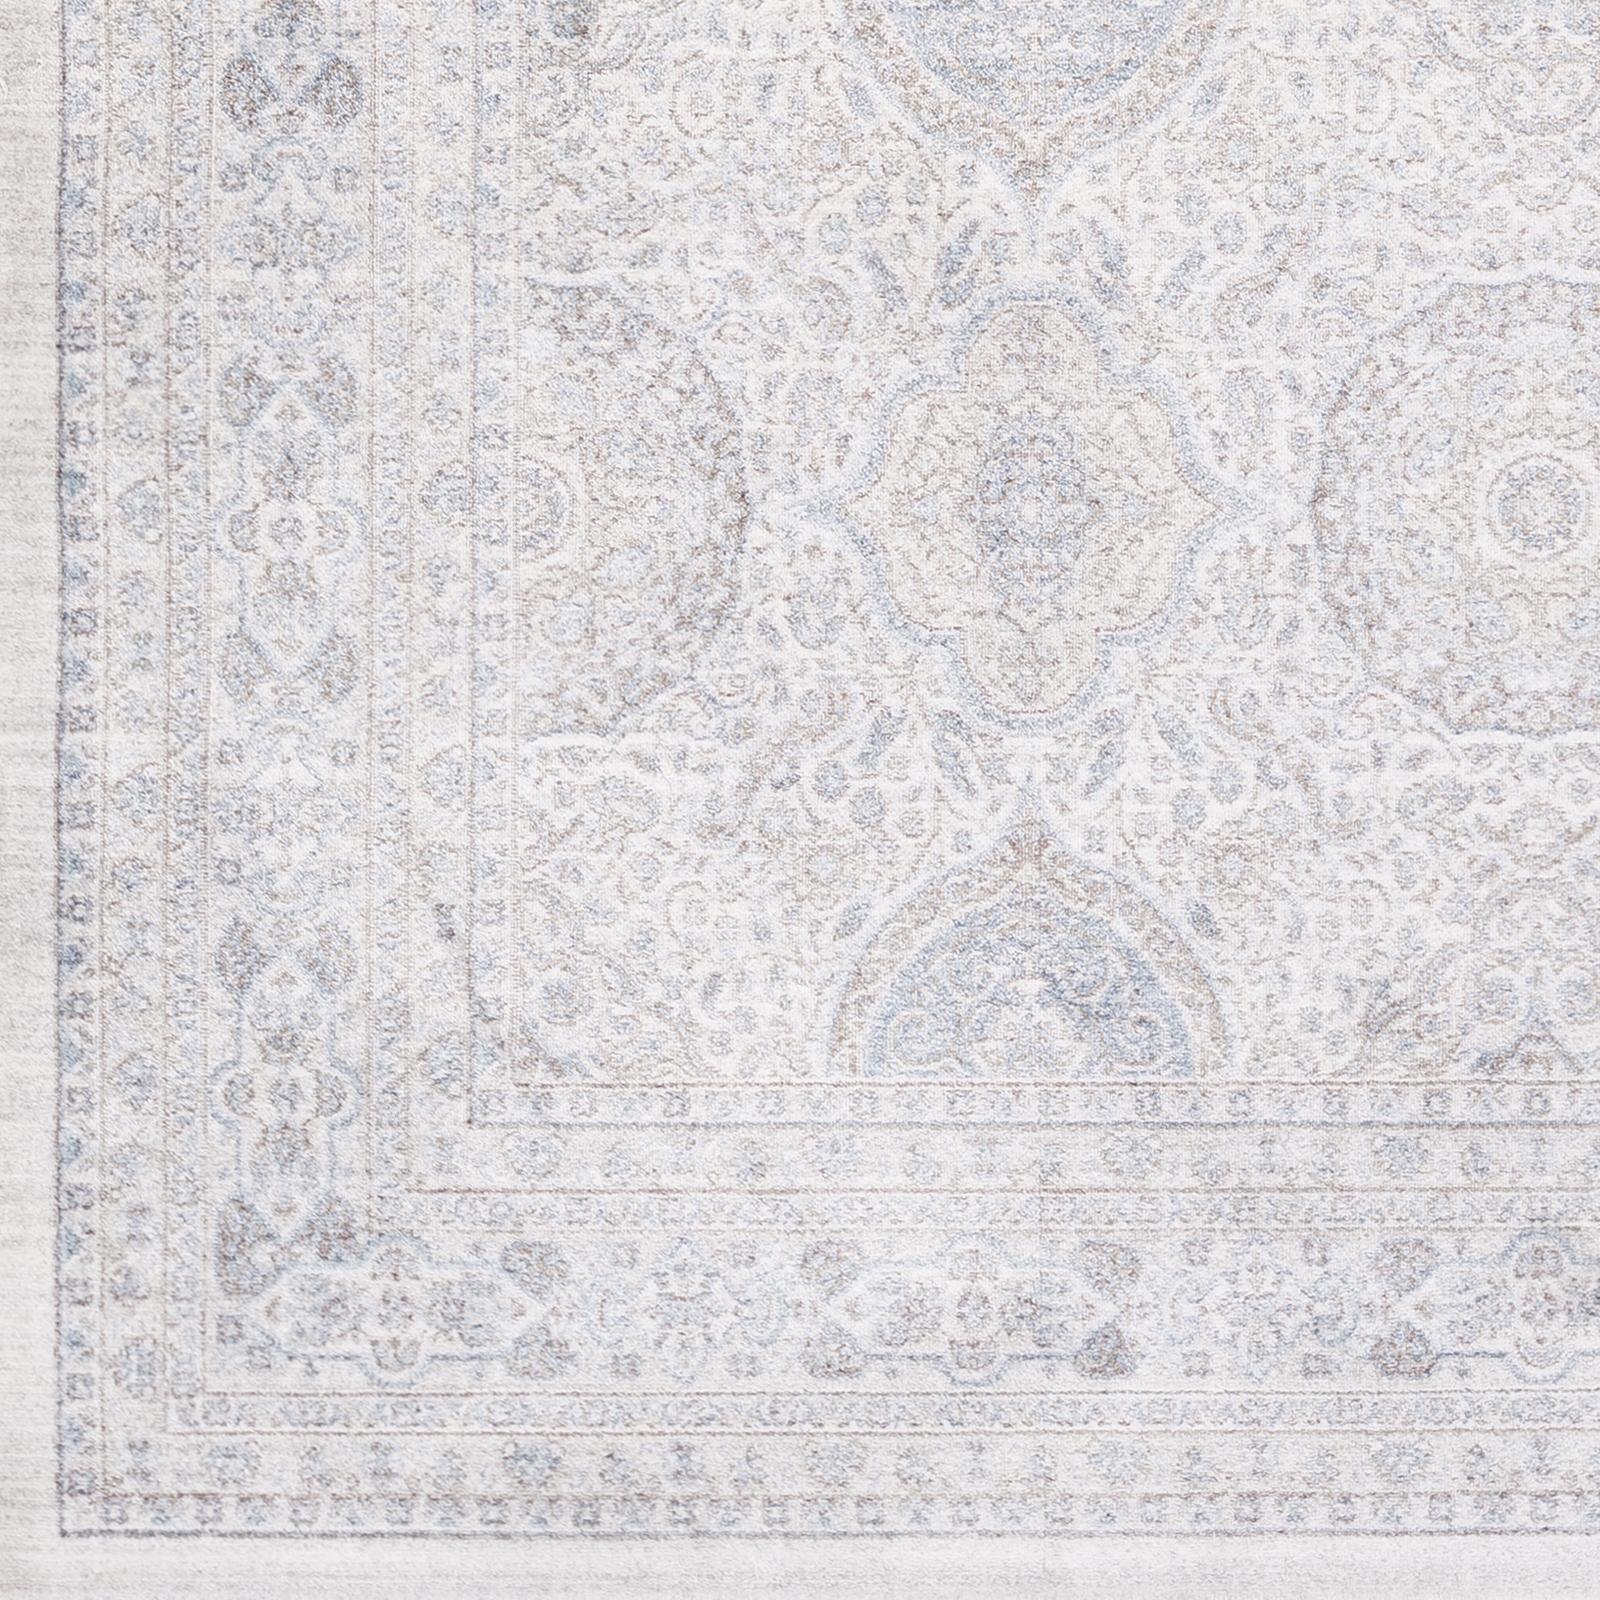 Couture Rug, 2' x 3' - Image 1